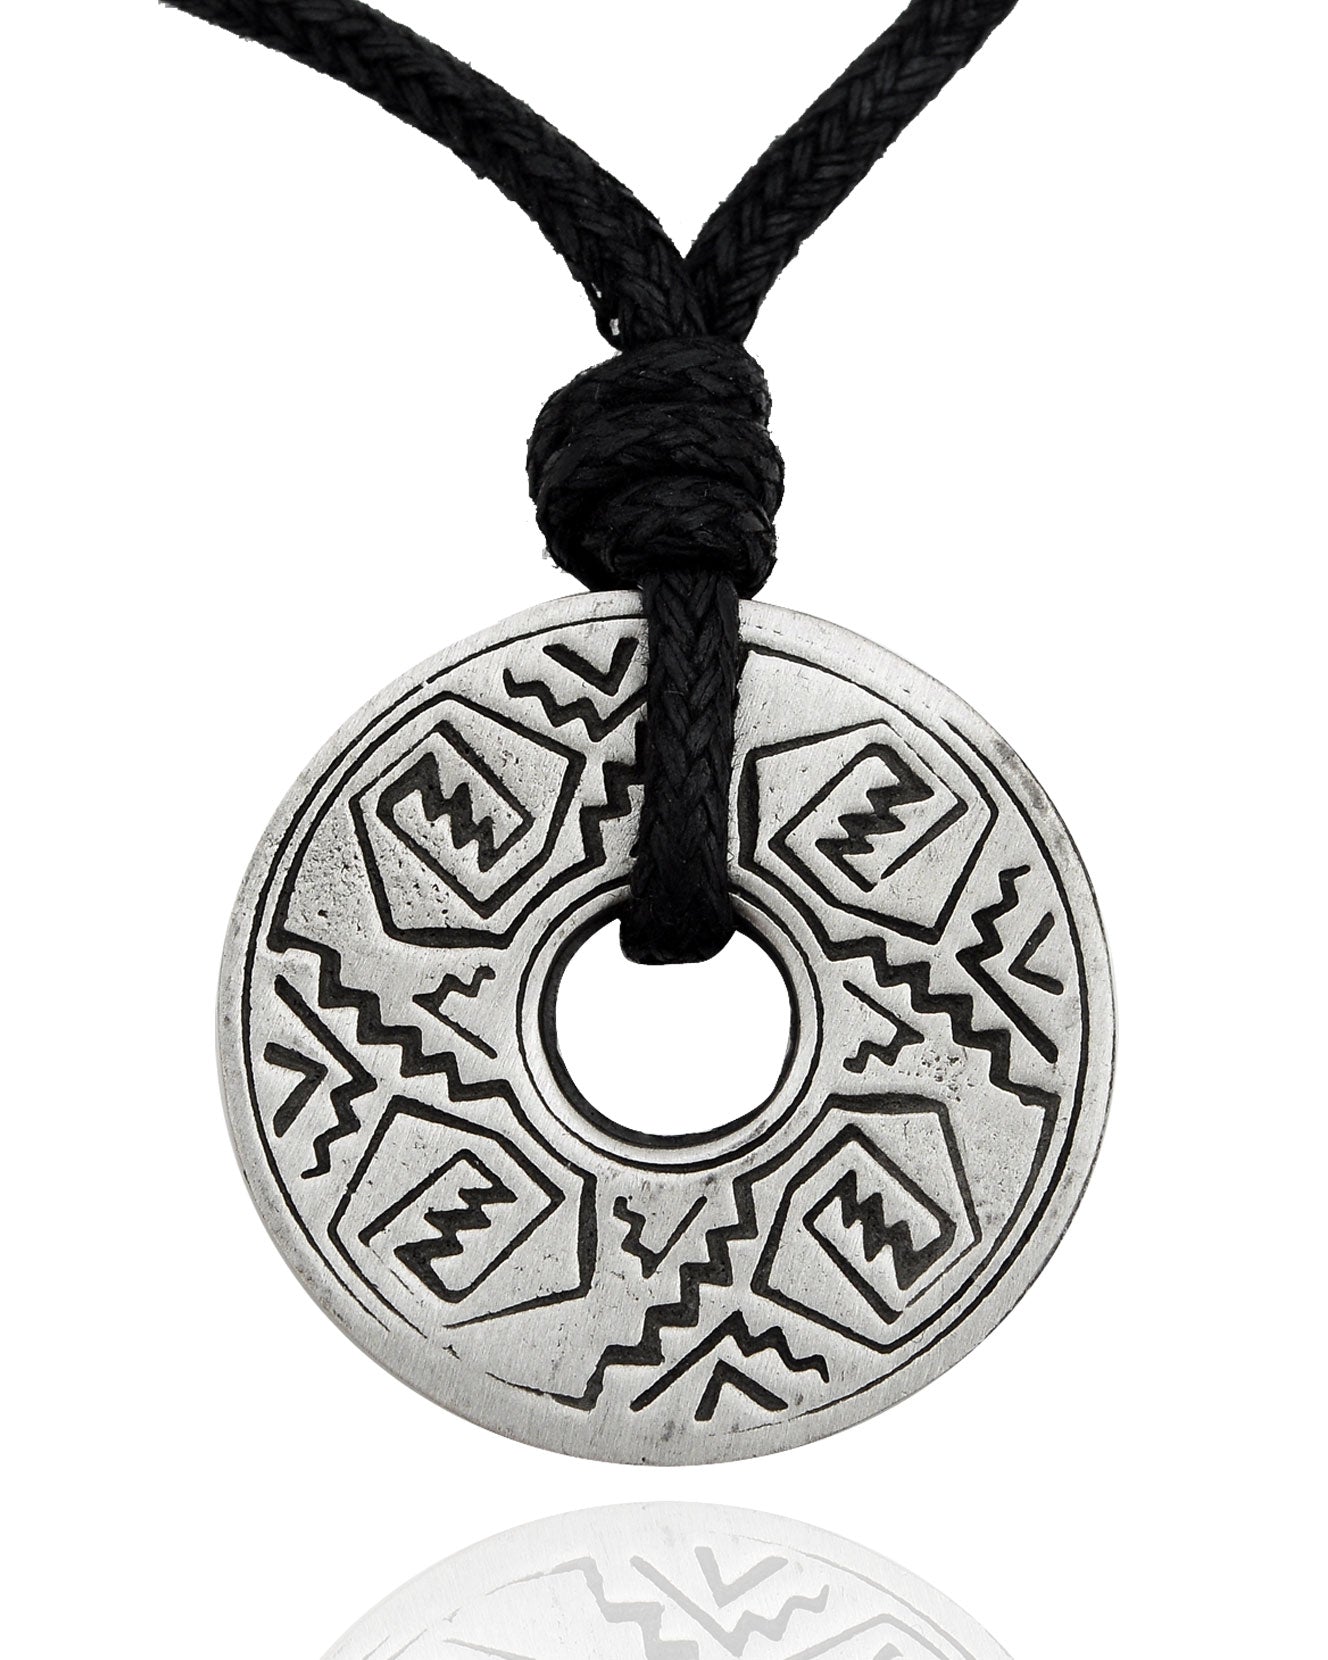 New Mayan Art Silver Pewter Charm Necklace Pendant Jewelry